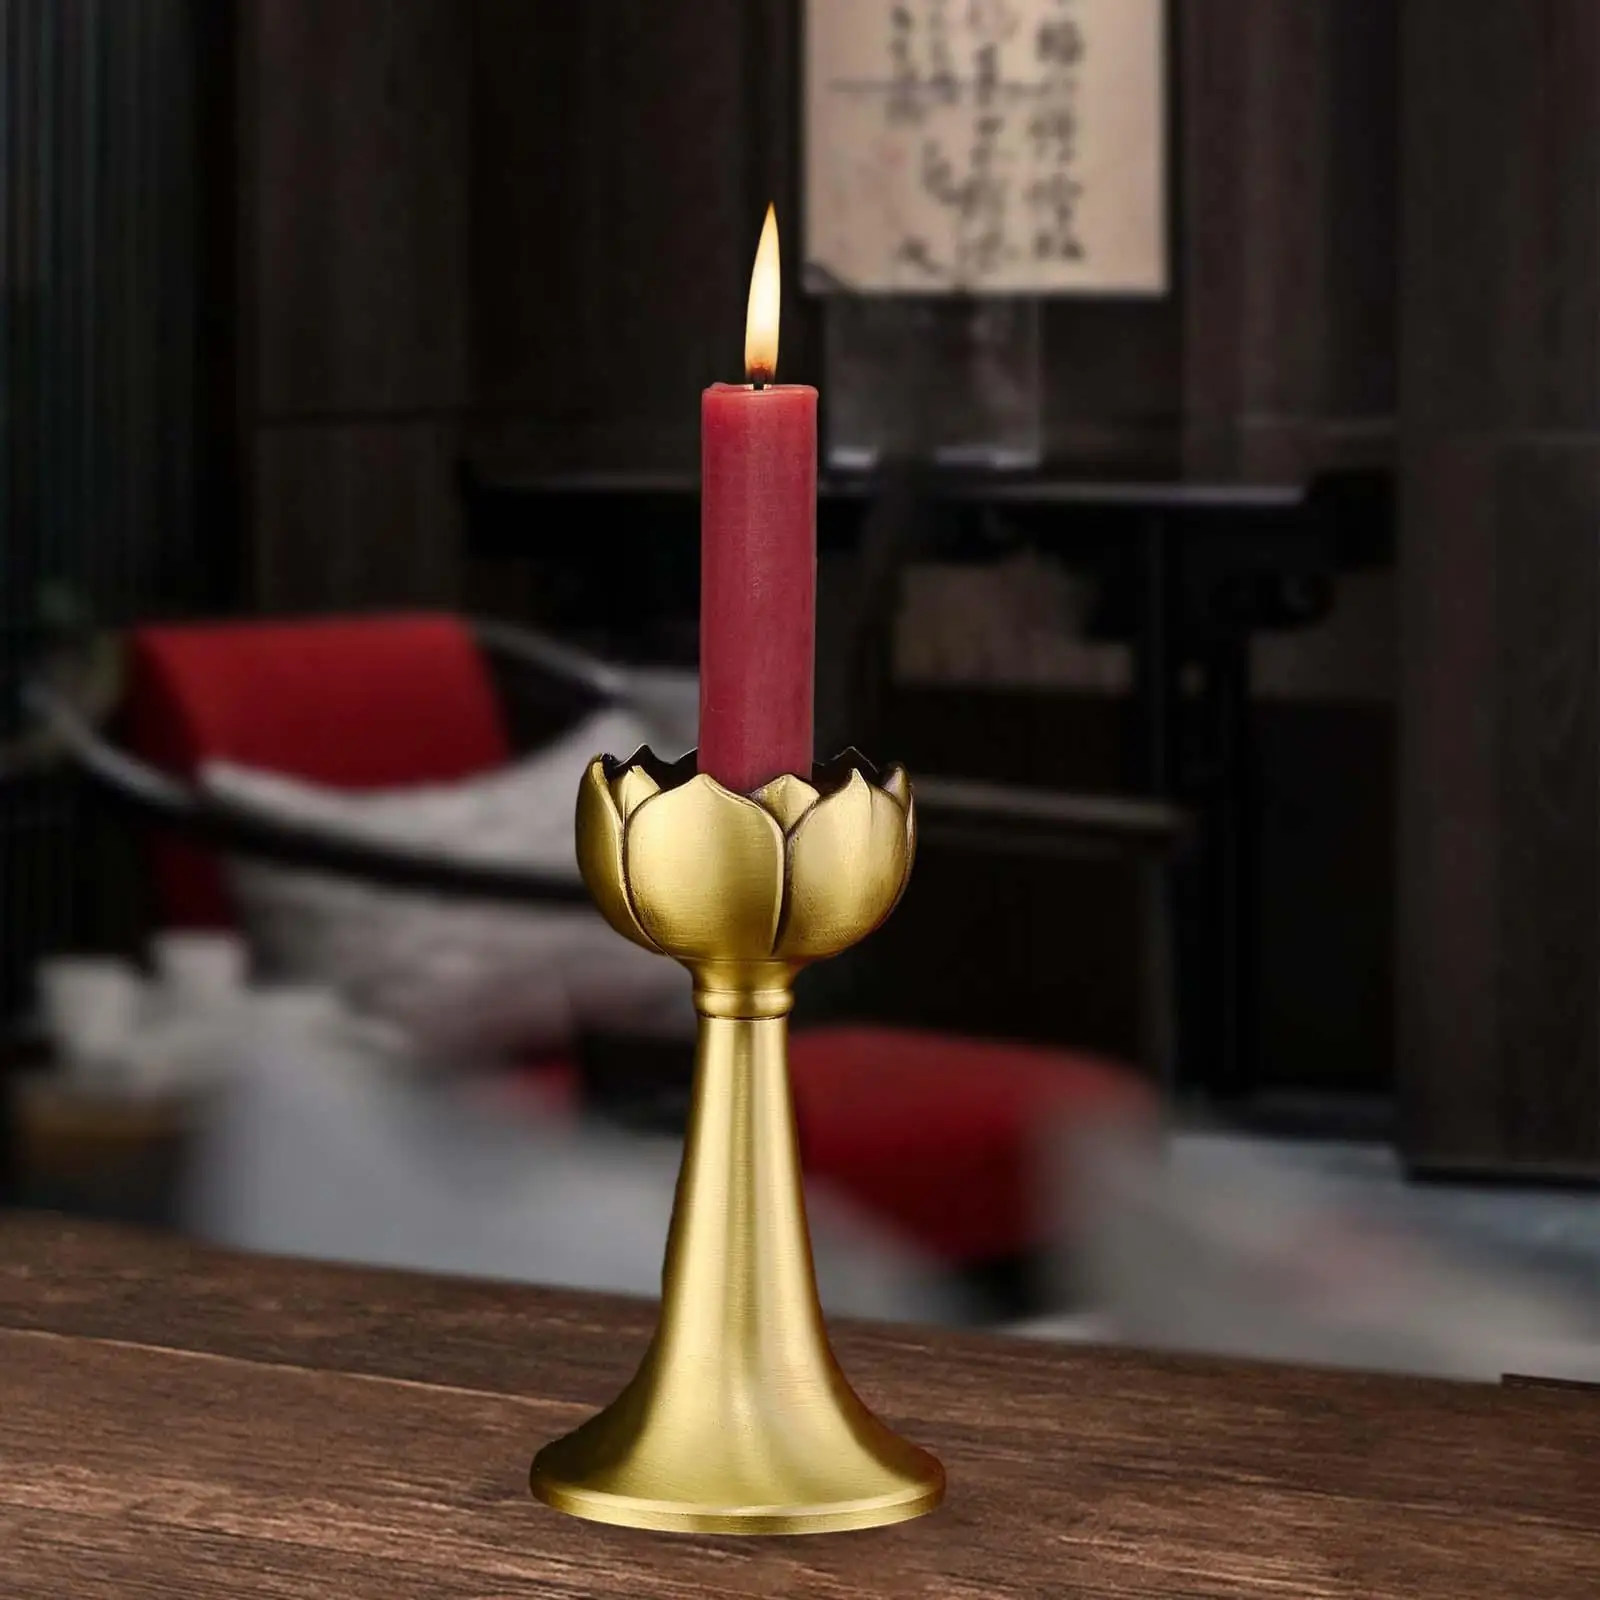 Brass Lotus Candle Holder Candlestick Holder Height 12.5cm Desk Ornament for Meditation and Relaxation Retro Style Durable